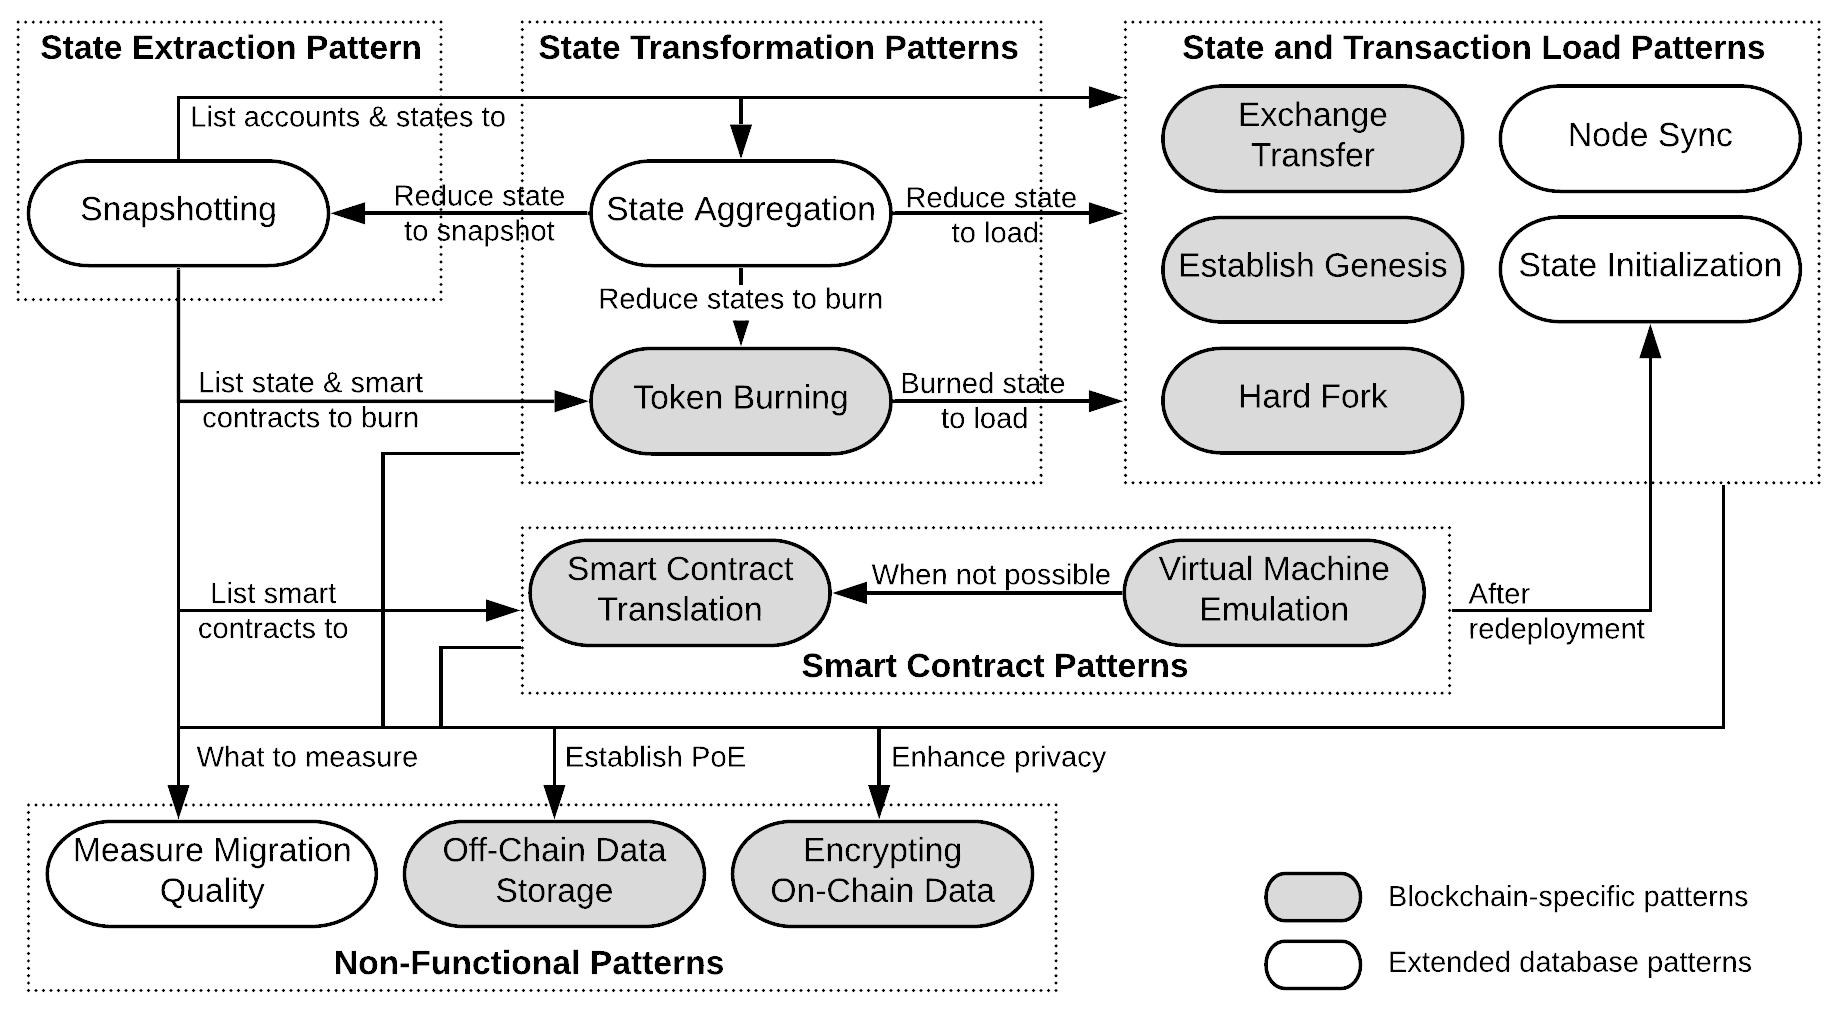 Overview of data migration patterns